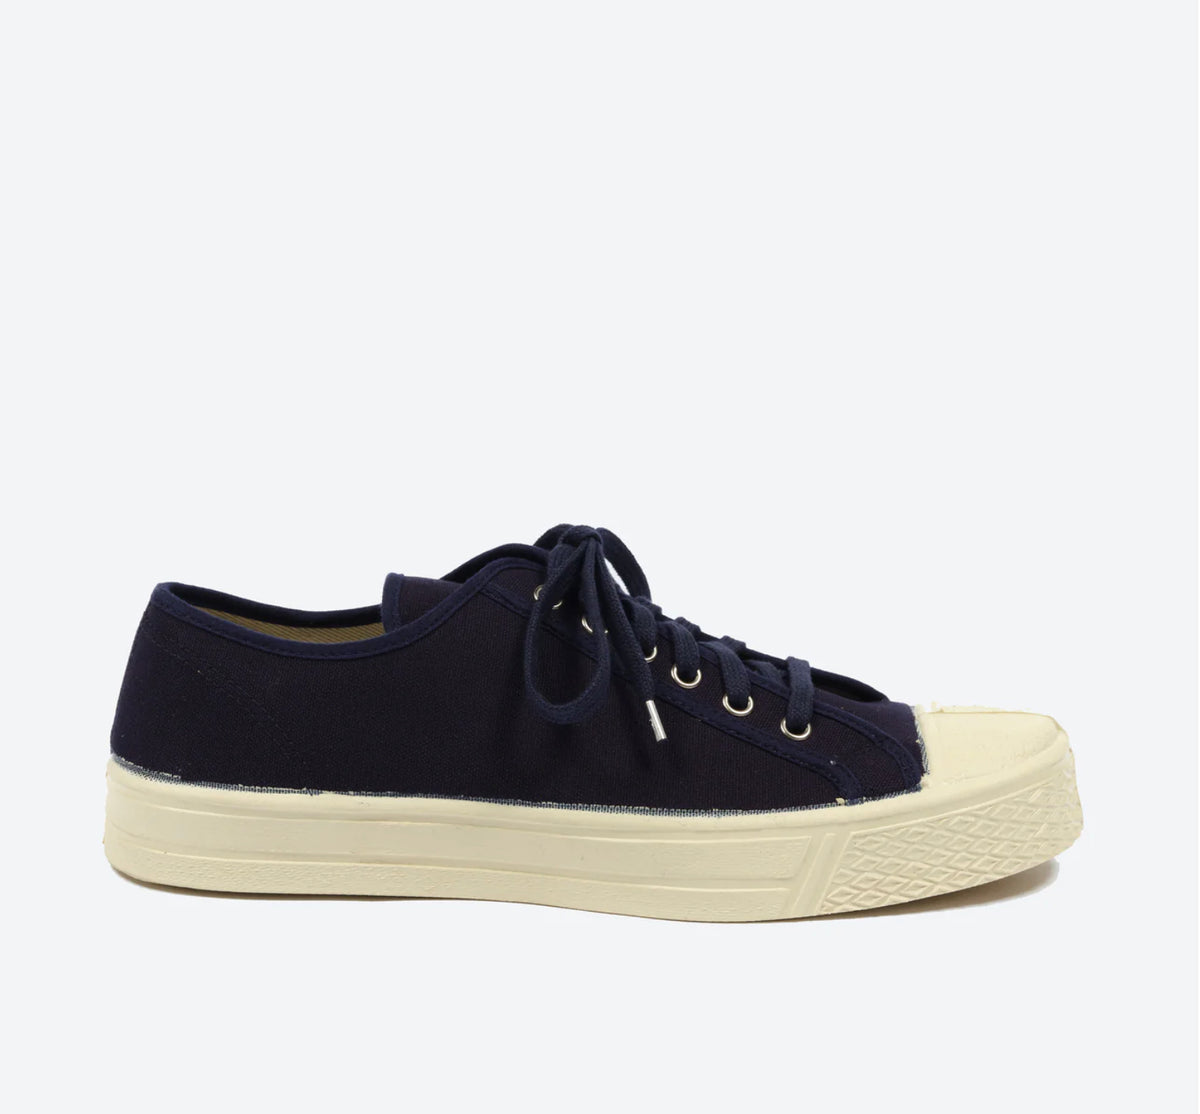 US Rubber Co Military White Low Top - Navy/White